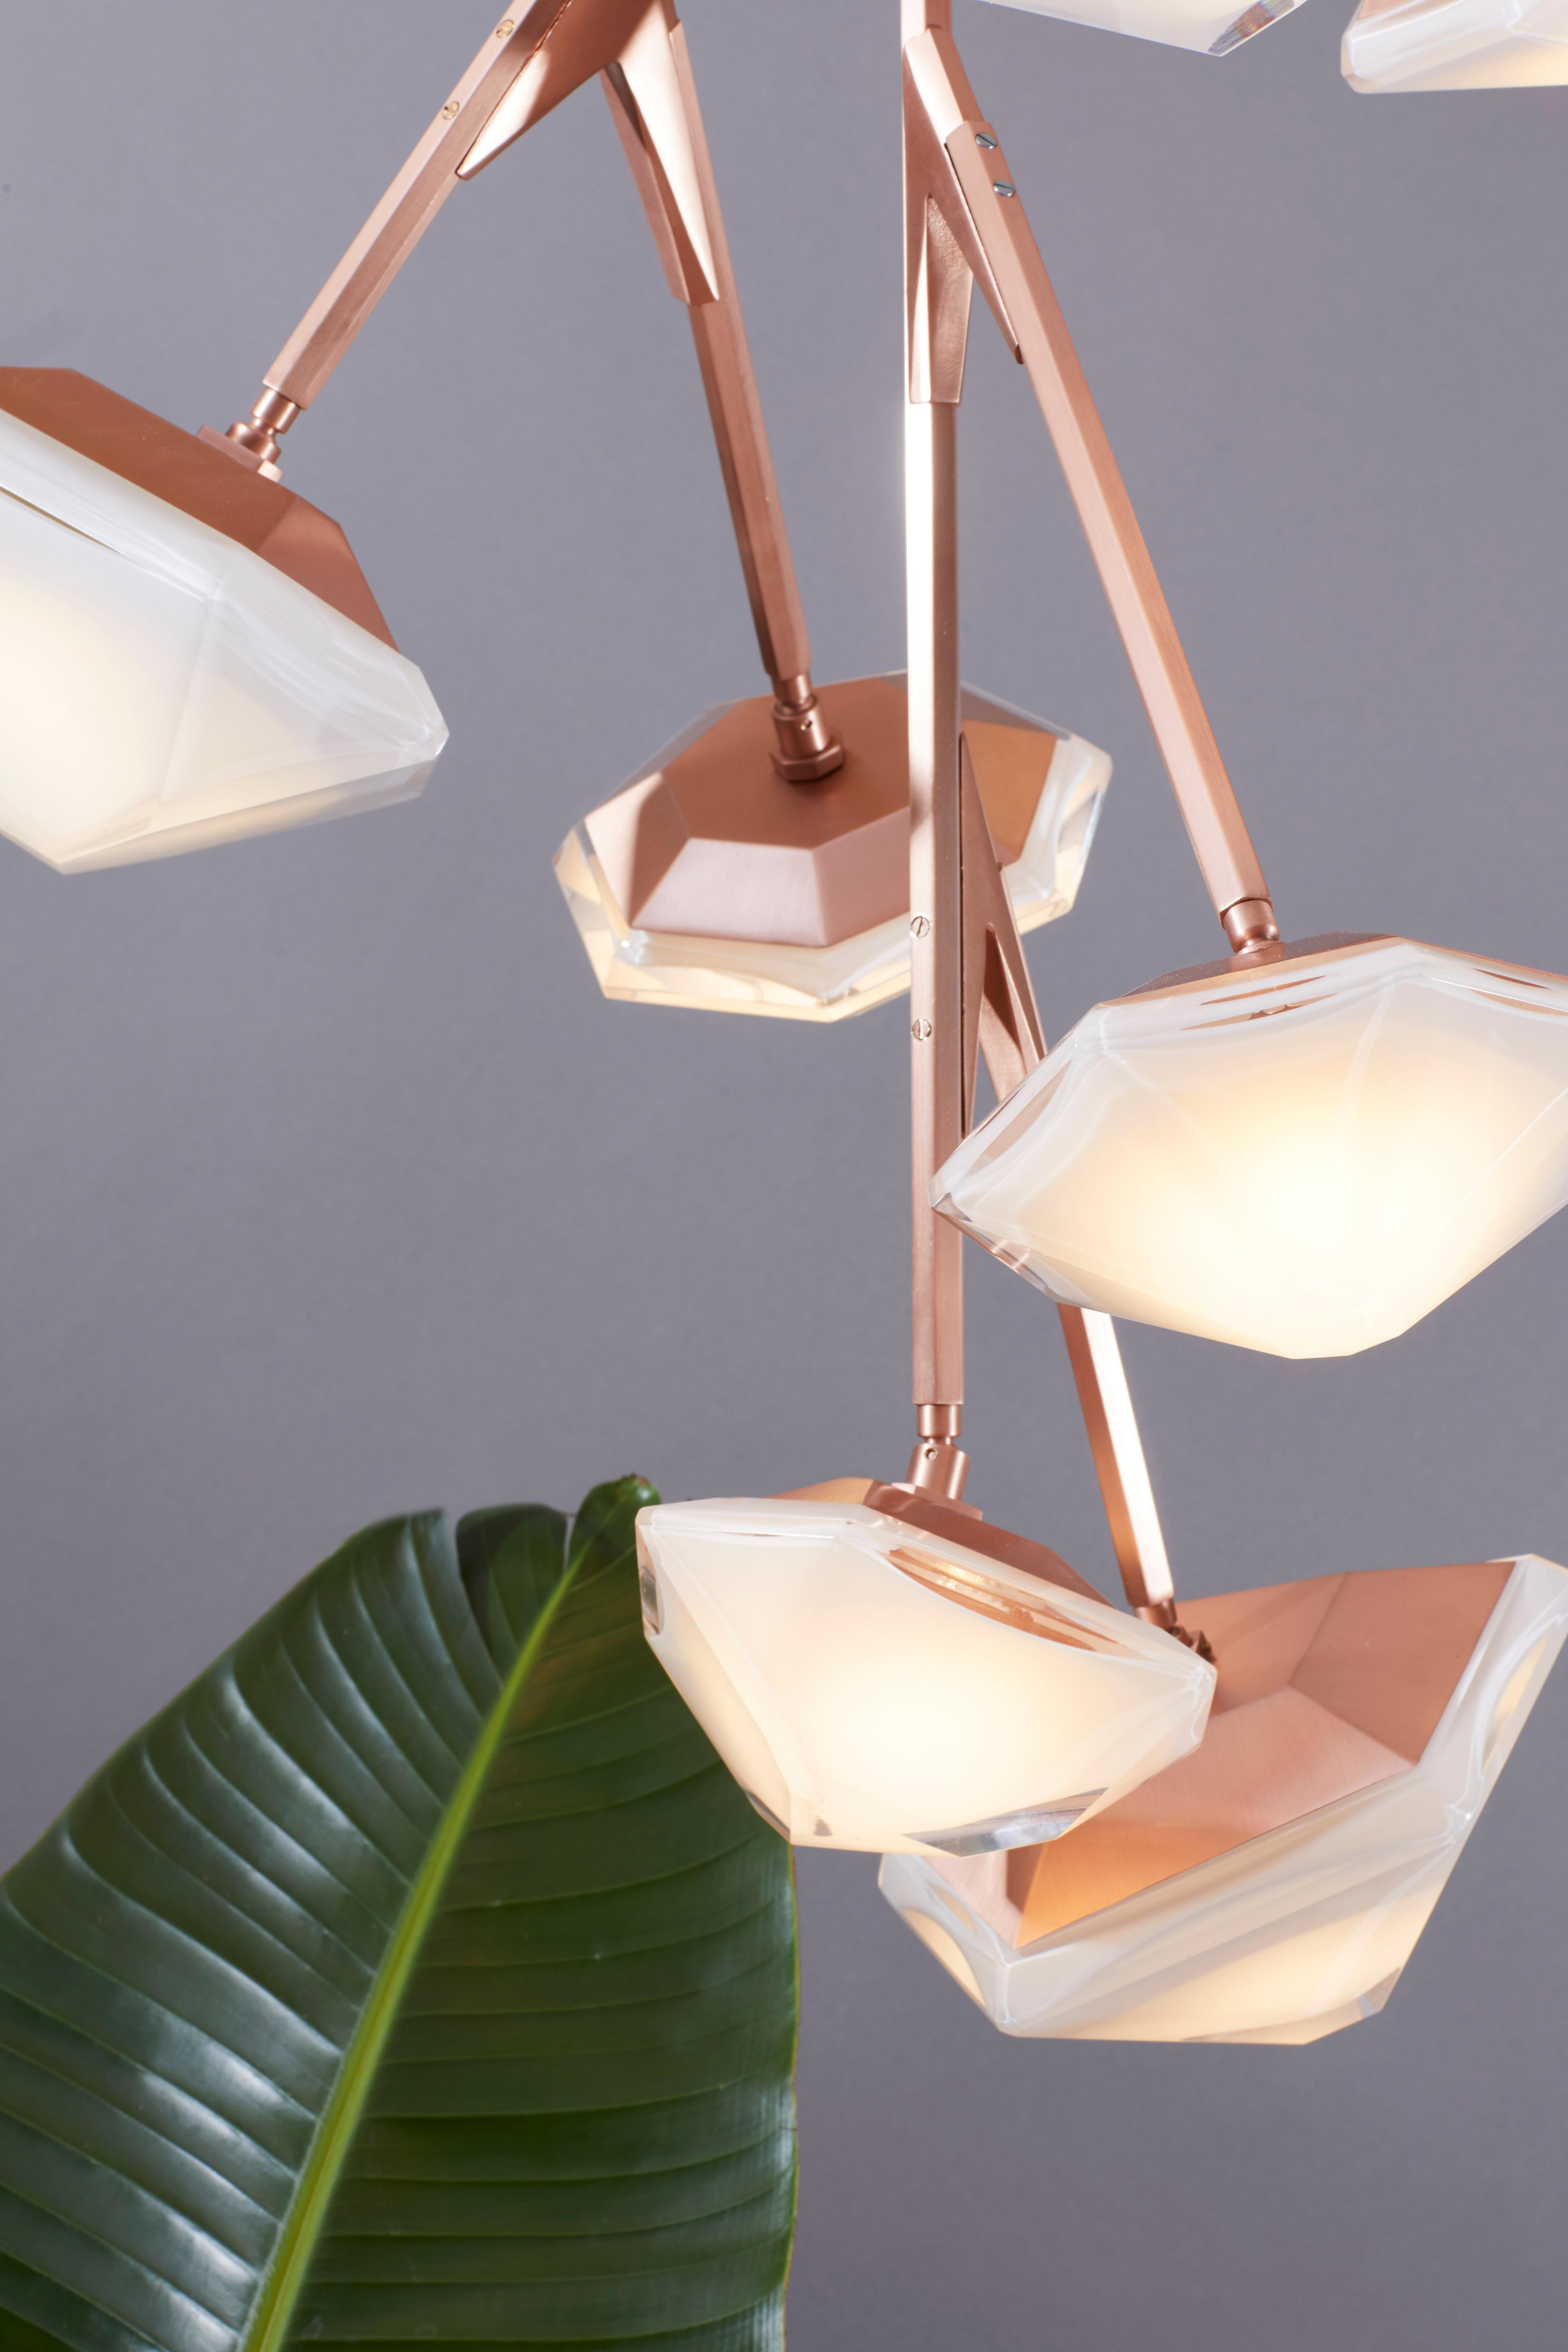 The Myriad series is the newest addition to the Gabriel Scott lighting family. Inspired by nature’s bioluminescent organisms, this modular series features the brand’s signature double-blown glass and satin metallic hardware. Its articulated stems